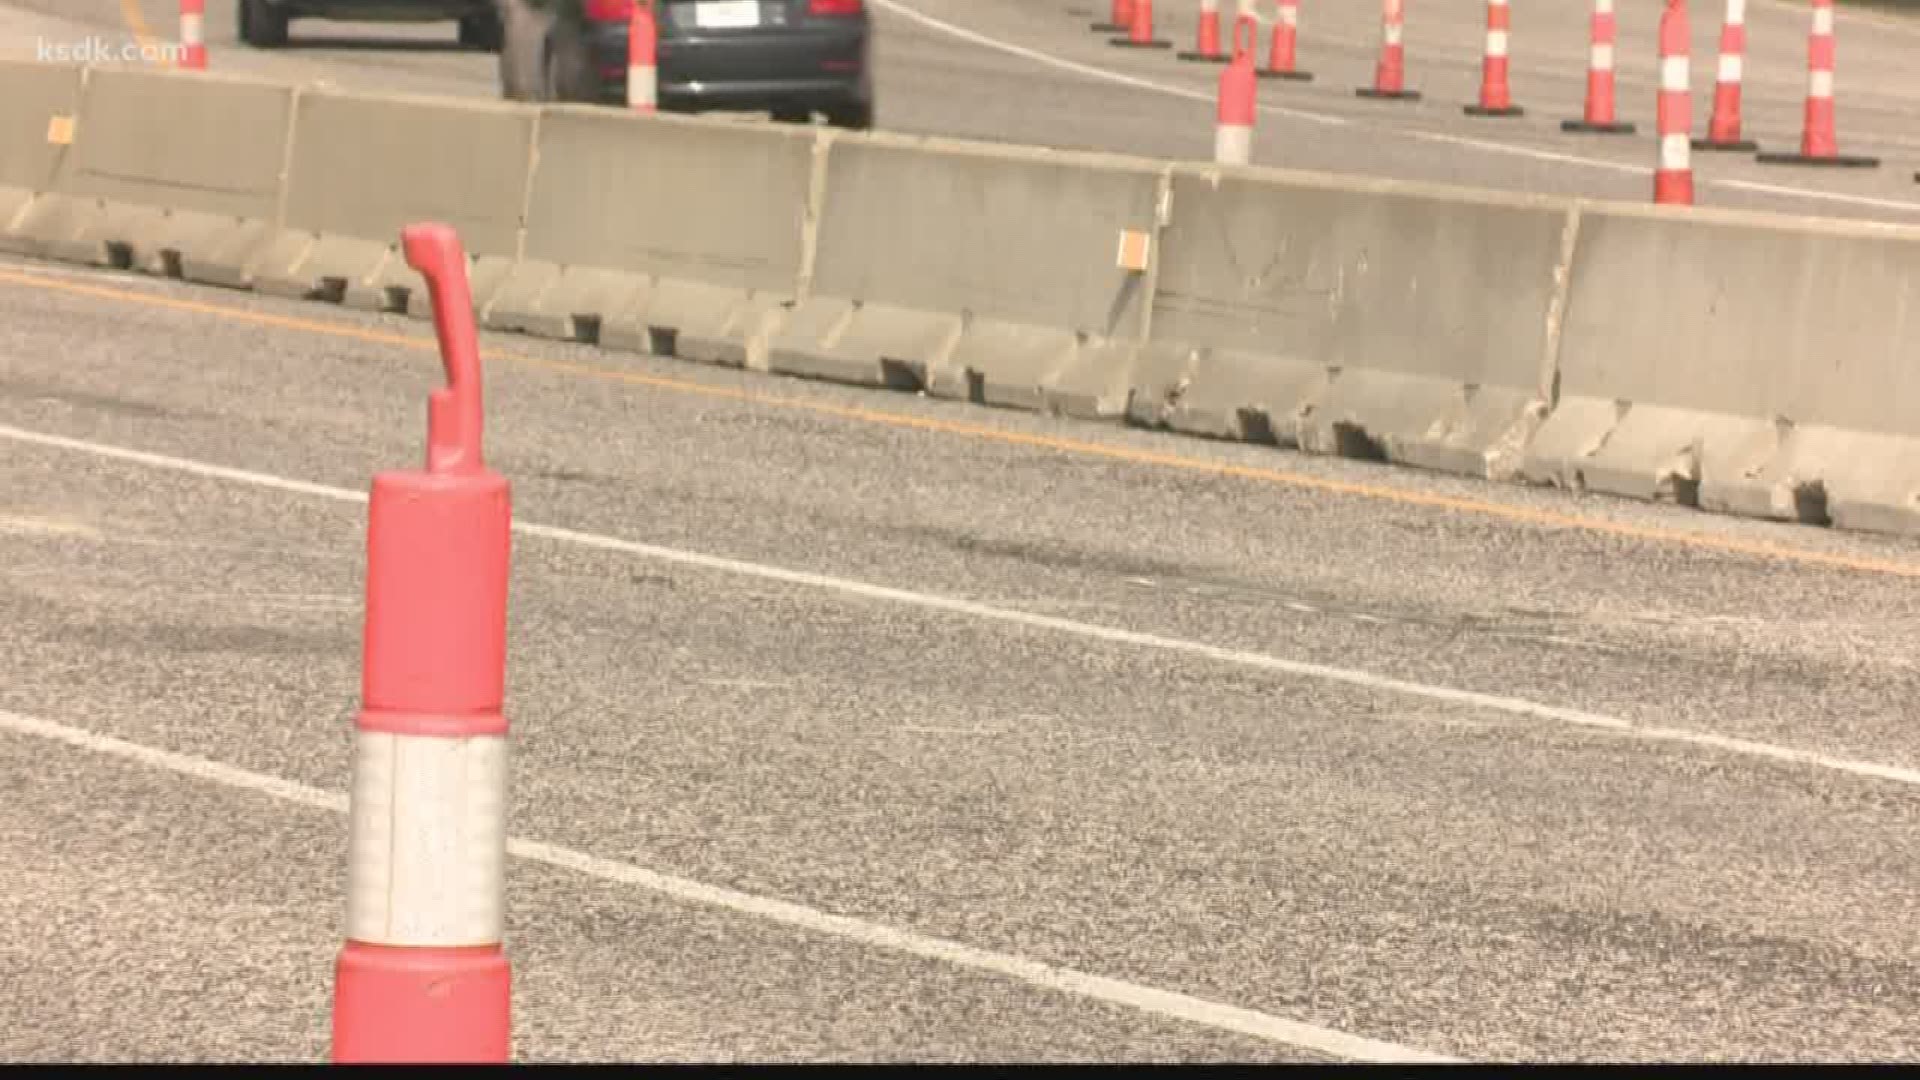 The Missouri Department of Transportation announced westbound lanes will be open by 2 p.m. and eastbound lanes will be open by 7 p.m. on June 27.